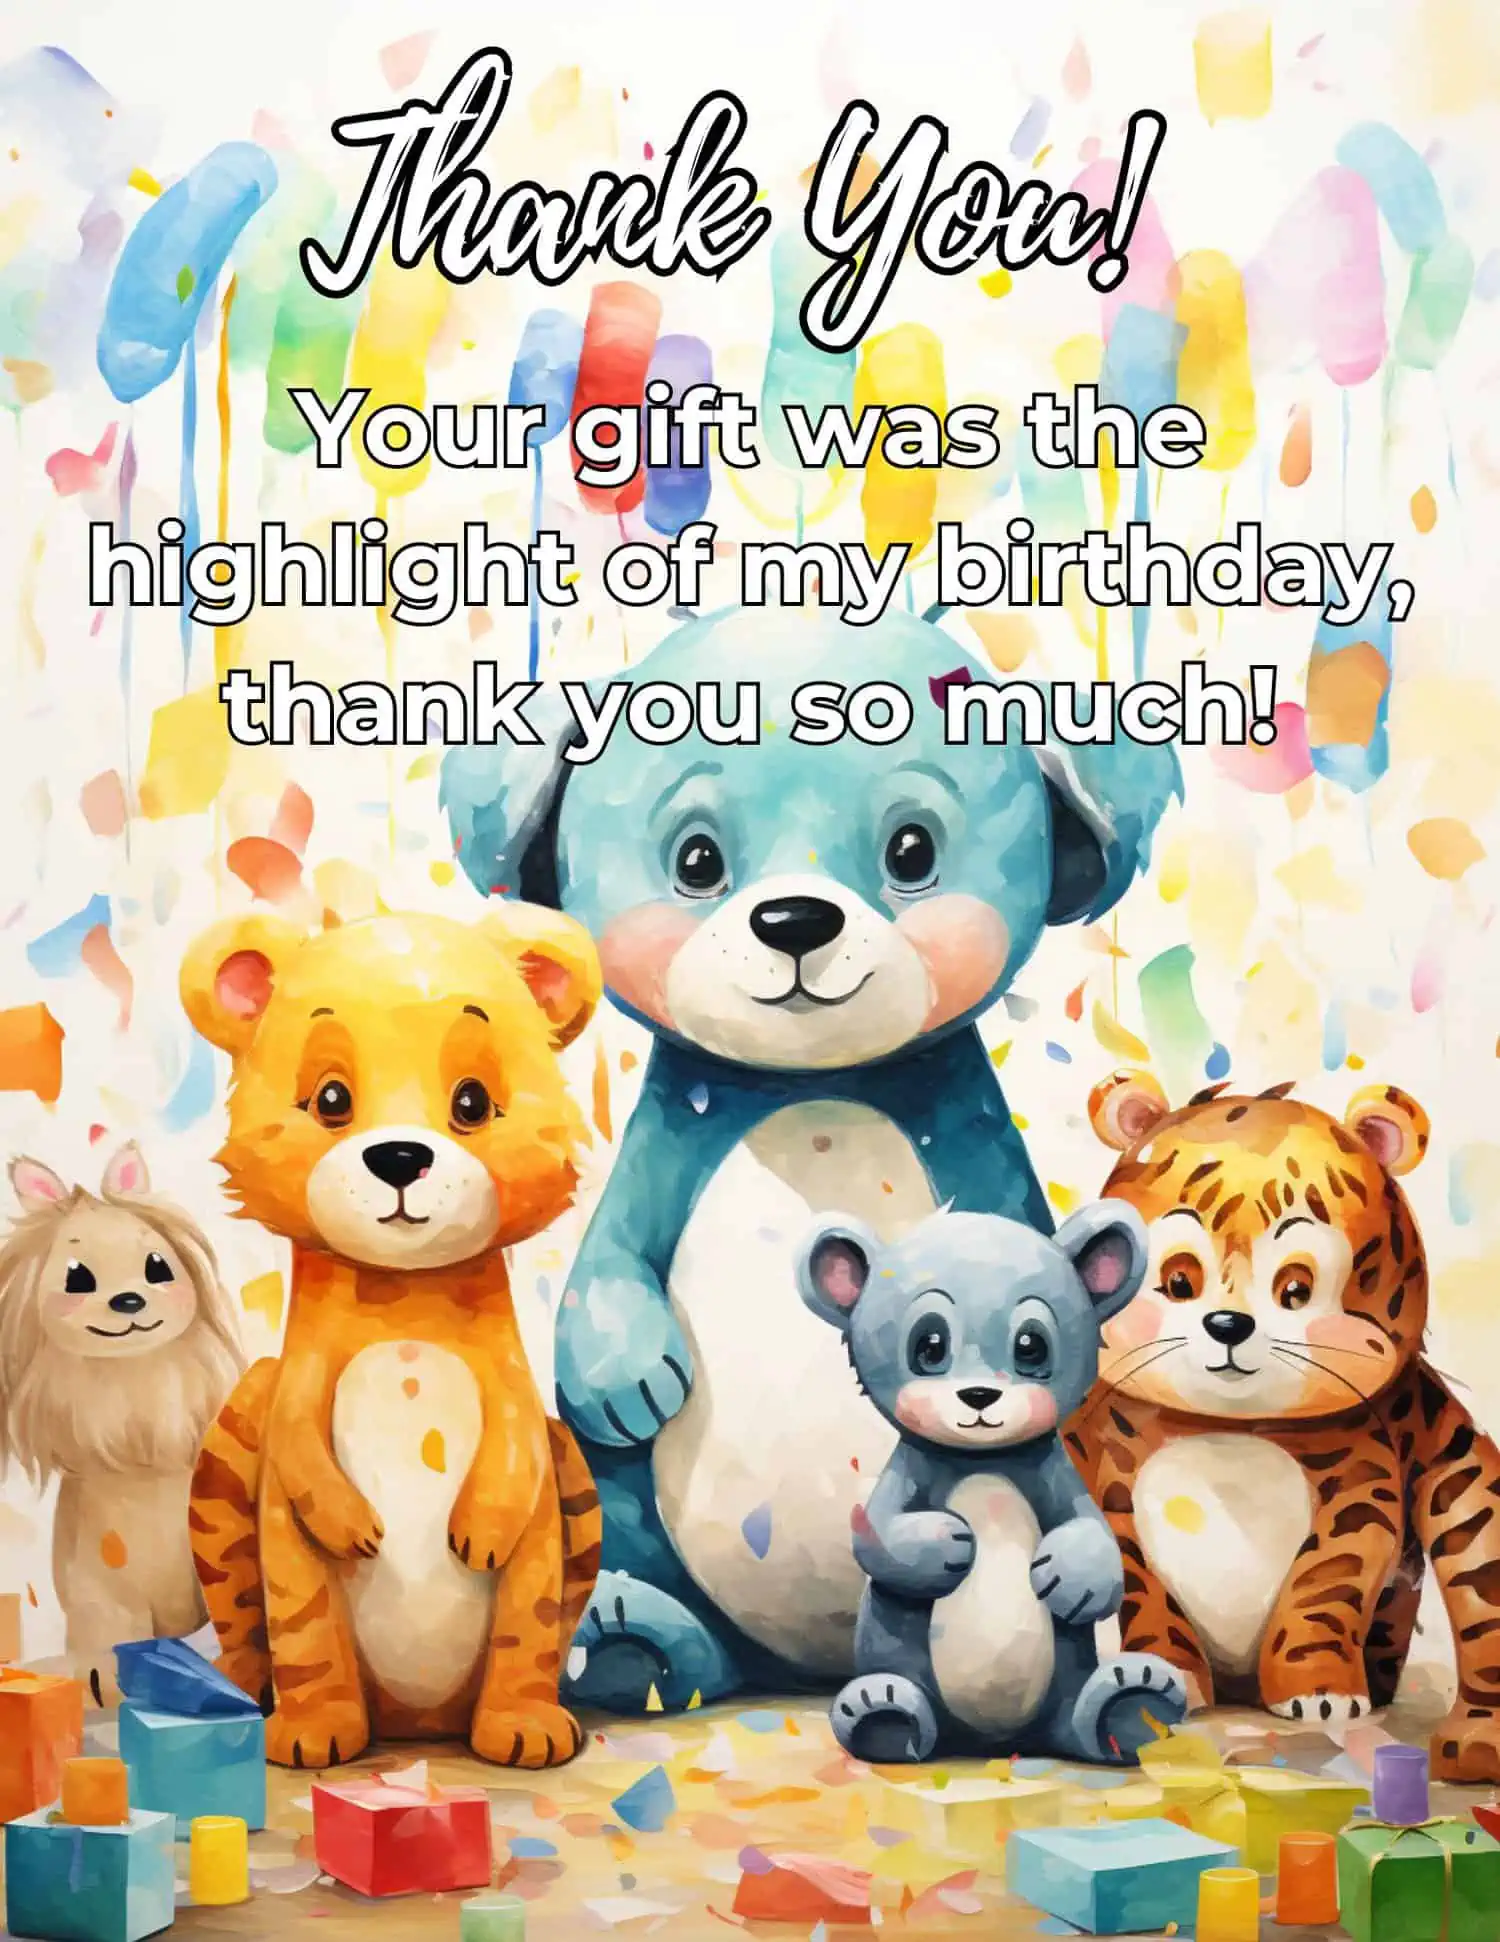 A delightful collection of messages to express gratitude for birthday gifts.